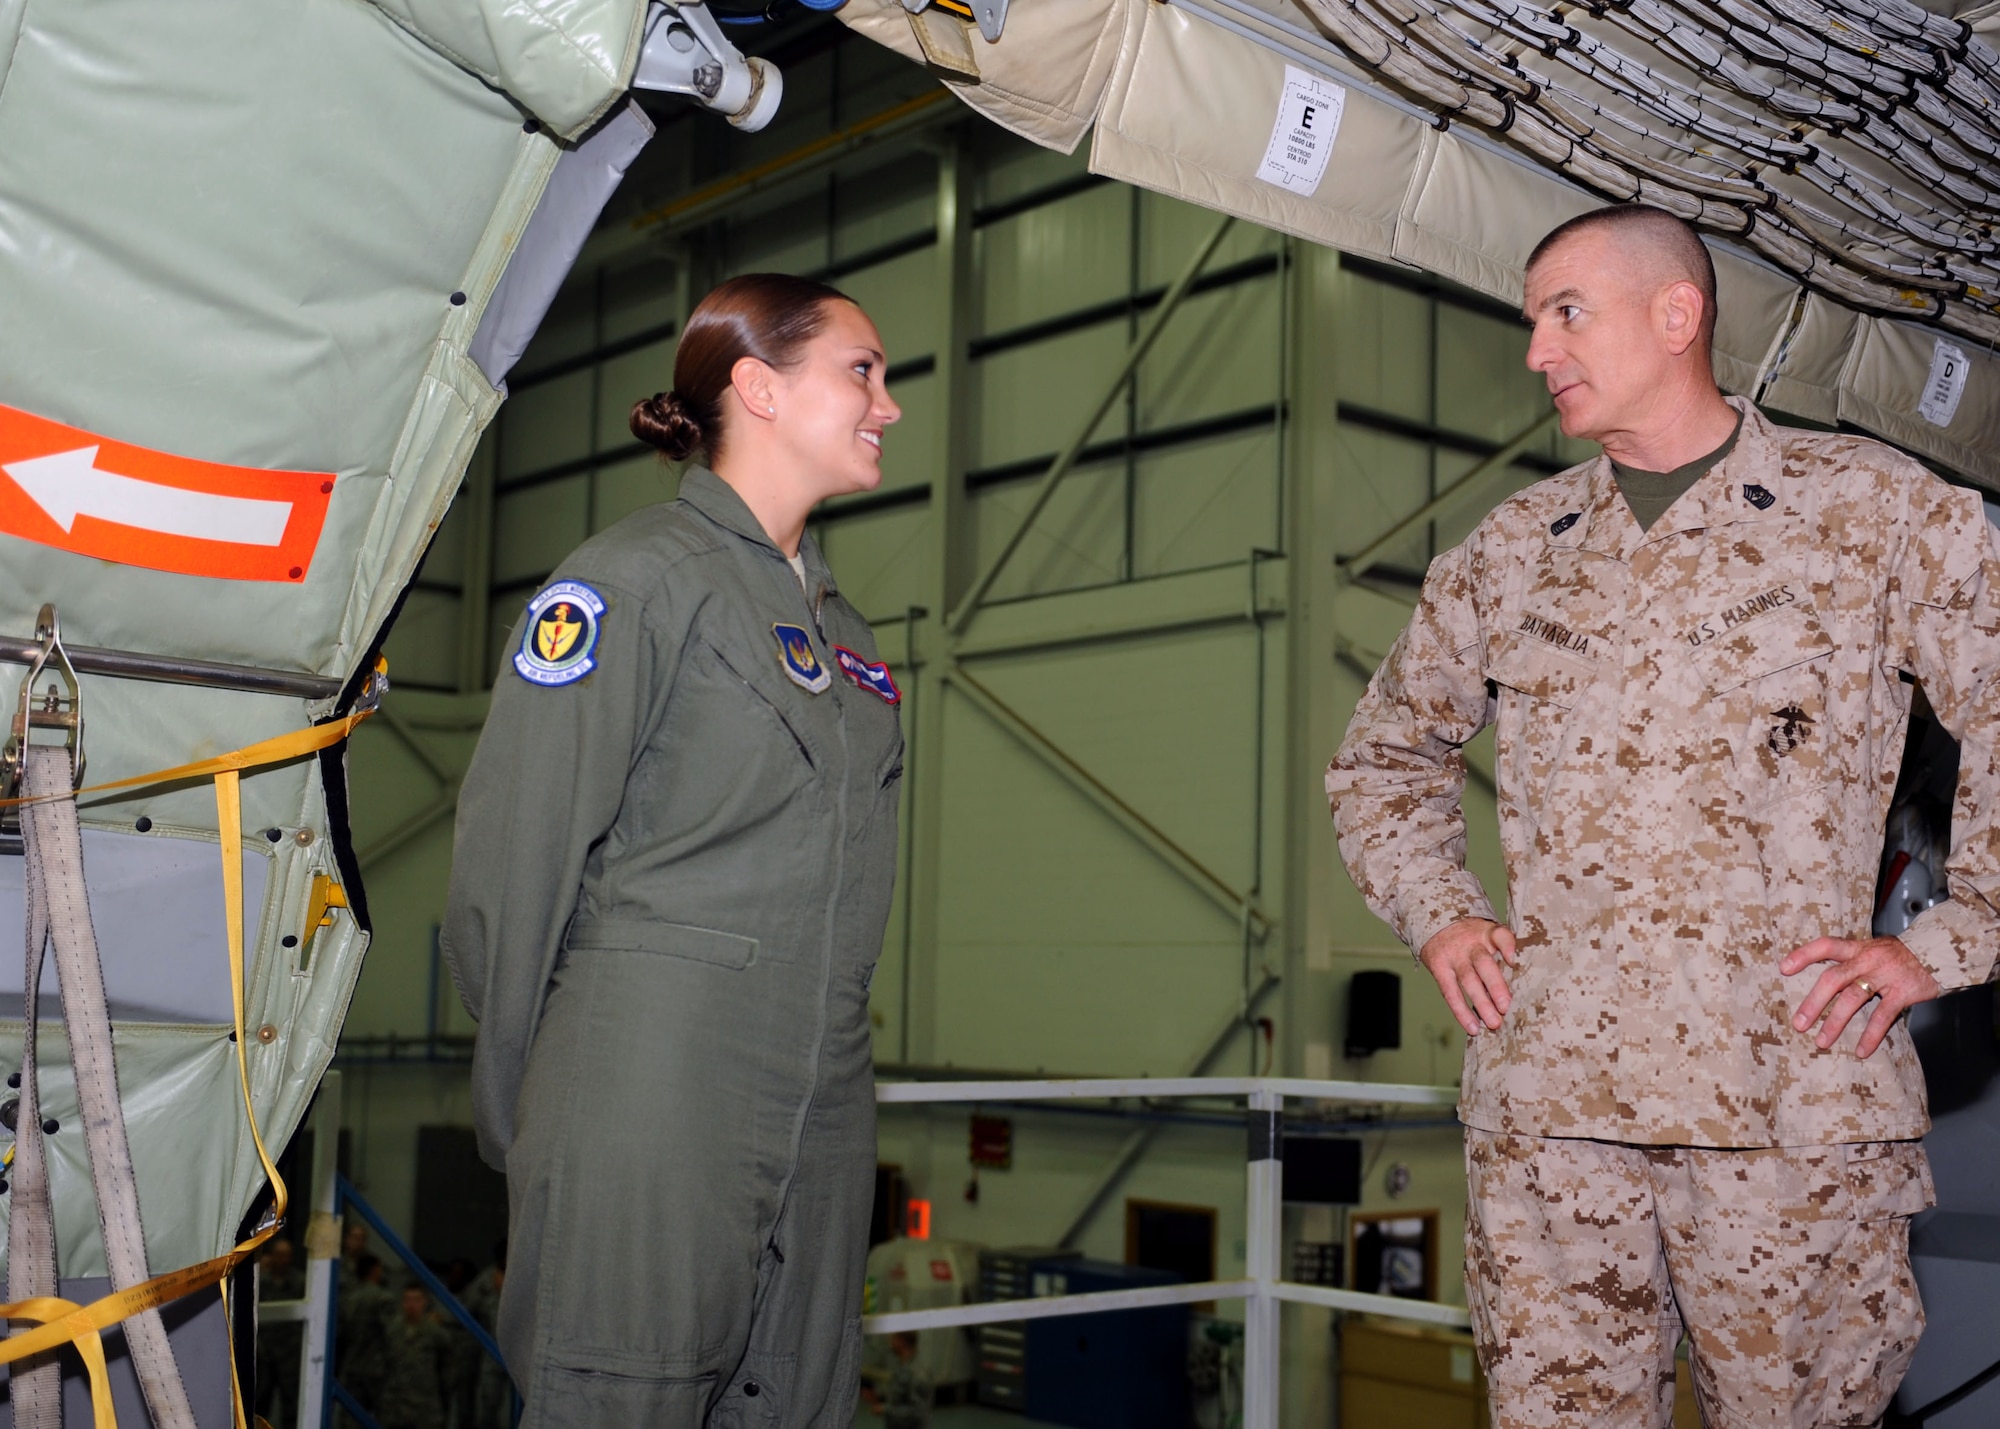 On the left, Senior Airman Amanda Ampey, 351st Air Refueling Squadron boom operator, meets U.S. Marine Corps Sgt. Maj. Bryan Battaglia, senior enlisted advisor to the Chairman of the Joint Chiefs of Staff, before showing him the interior of a KC-135 Stratotanker June 20, 2013, at Hangar 814 during a tour of RAF Mildenhall, England. While on RAF Mildenhall, Battaglia also viewed 352nd Special Operations Group assets, and he addressed Airmen during a base town hall meeting. (U.S. Air Force photo by Airman 1st Class Preston Webb/Released)